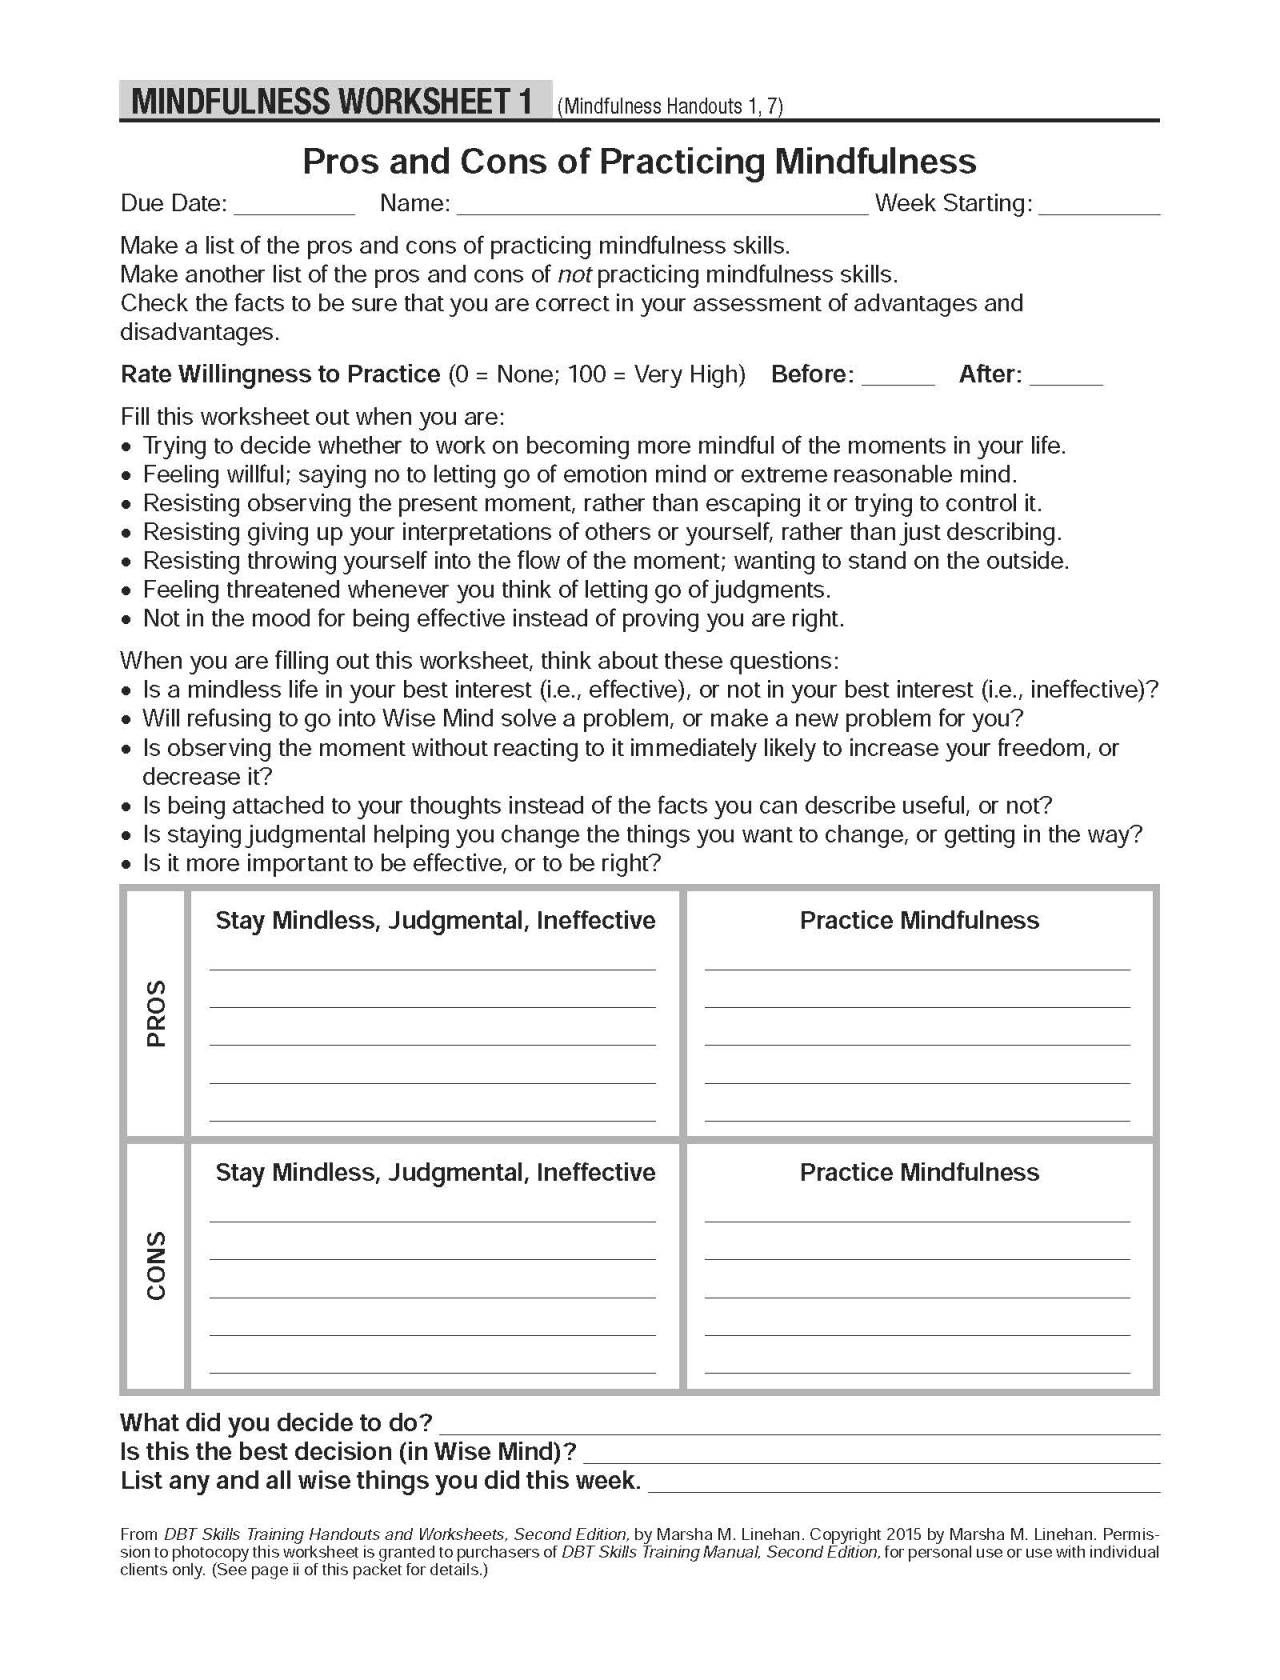 dbt-self-help-resources-pros-and-cons-of-practicing-mindfulness-fill-this-worksheet-out-when-you